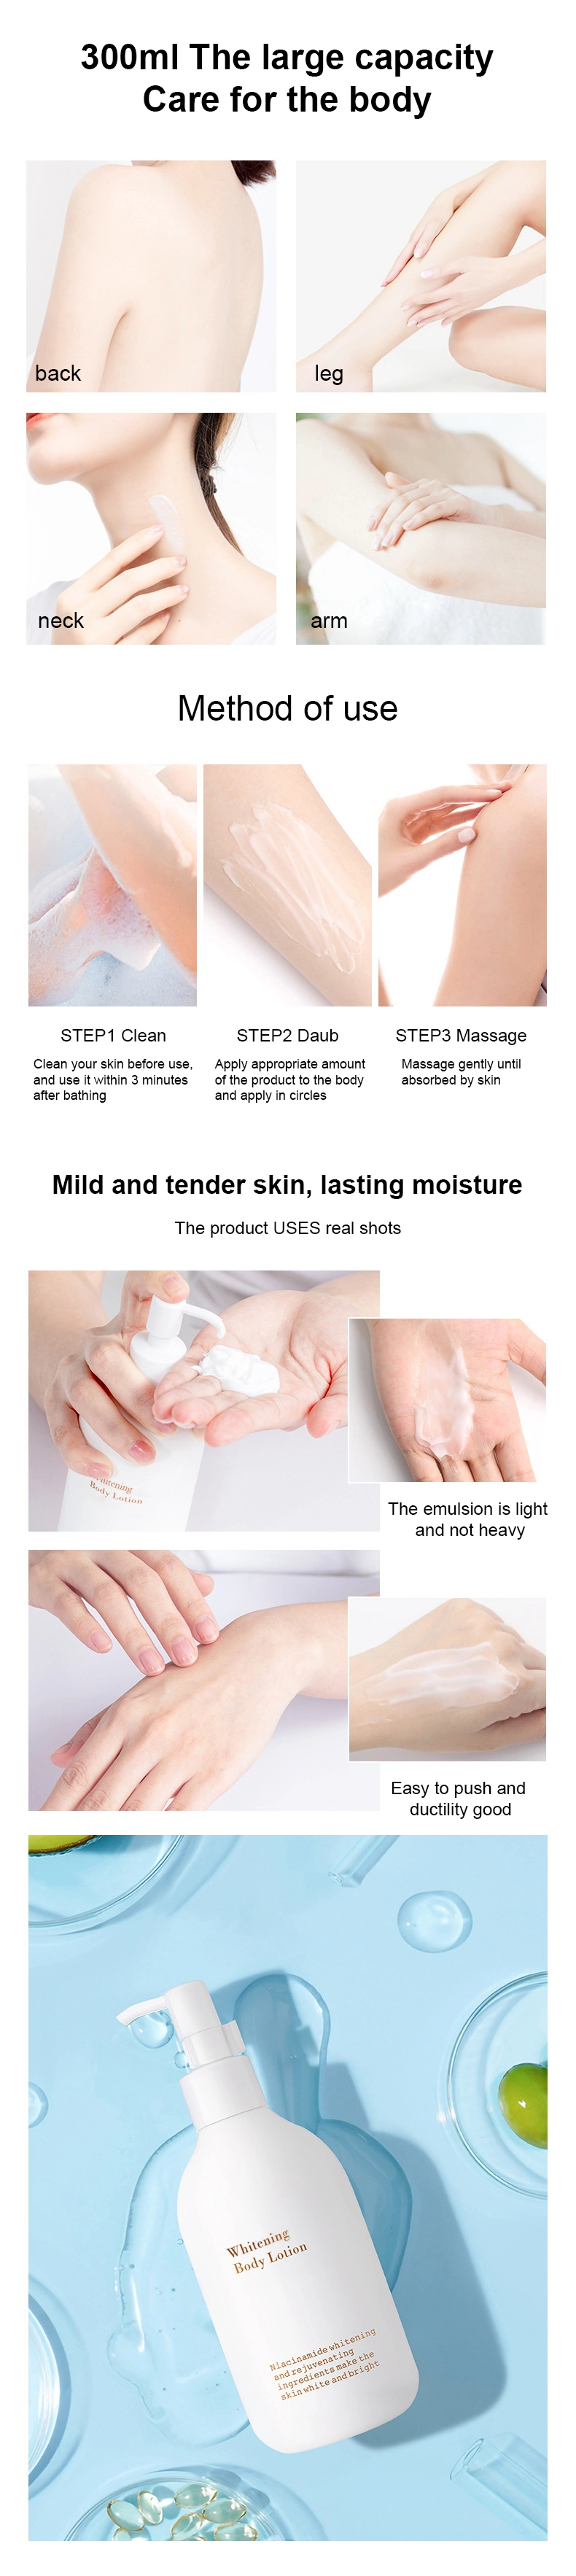 Skin Product Manufacturers Best Natural Moisturizer for Dry Skin Cocoa Butter Face Cream